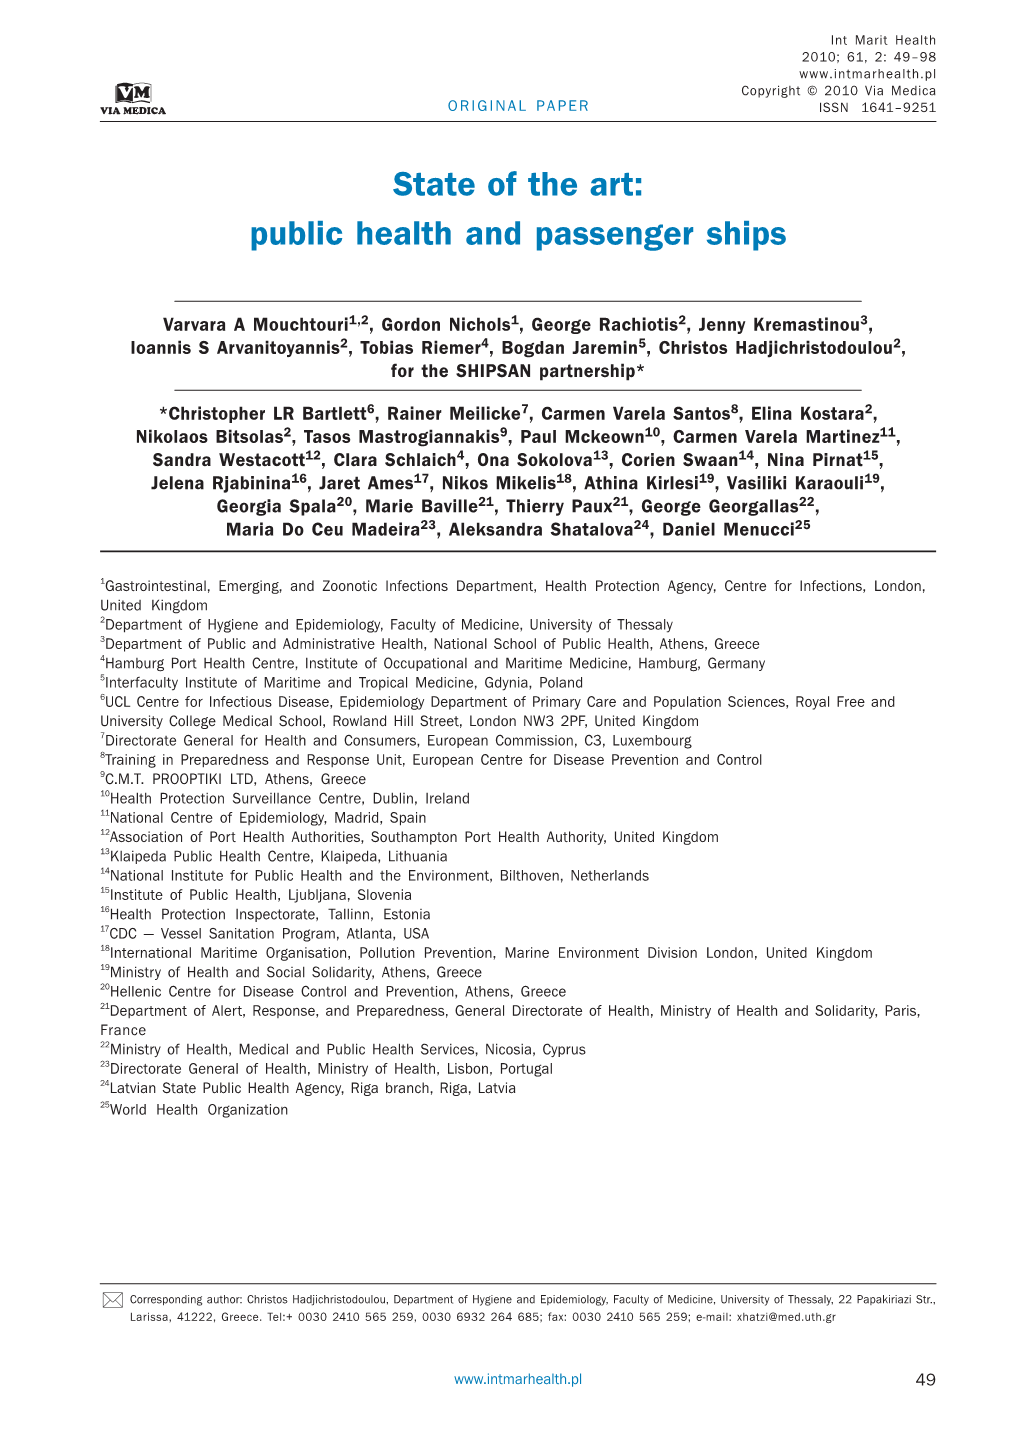 State of the Art: Public Health and Passenger Ships